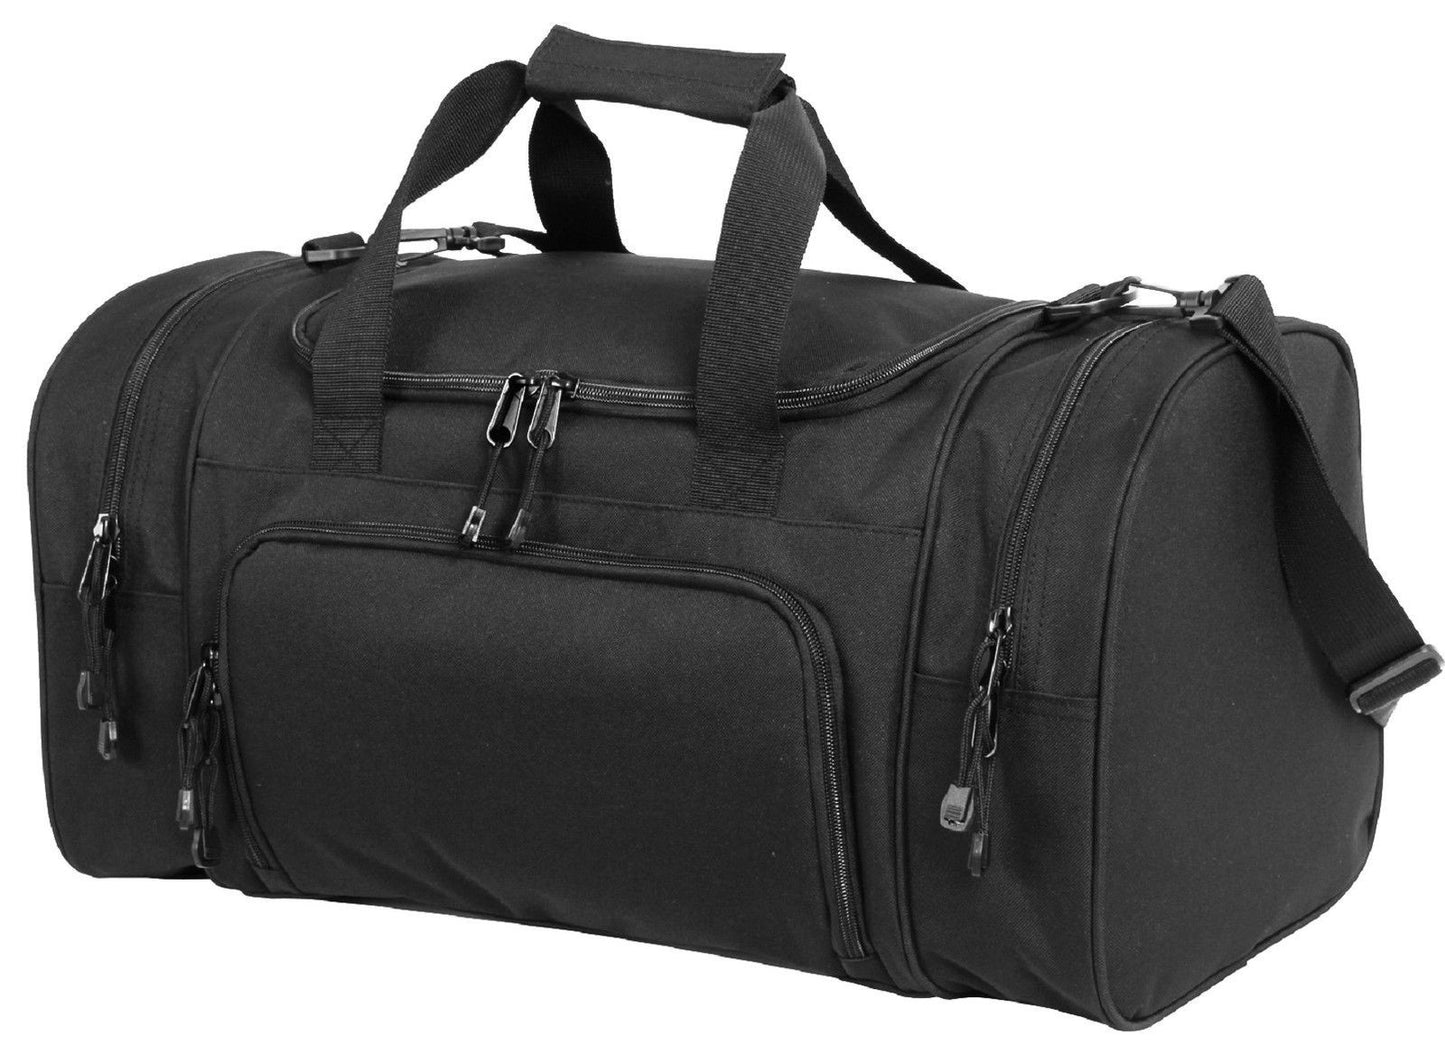 Black Sport Duffle Carry On Bag - Versatile Rothco 21" Gym Travel & Workout Bags